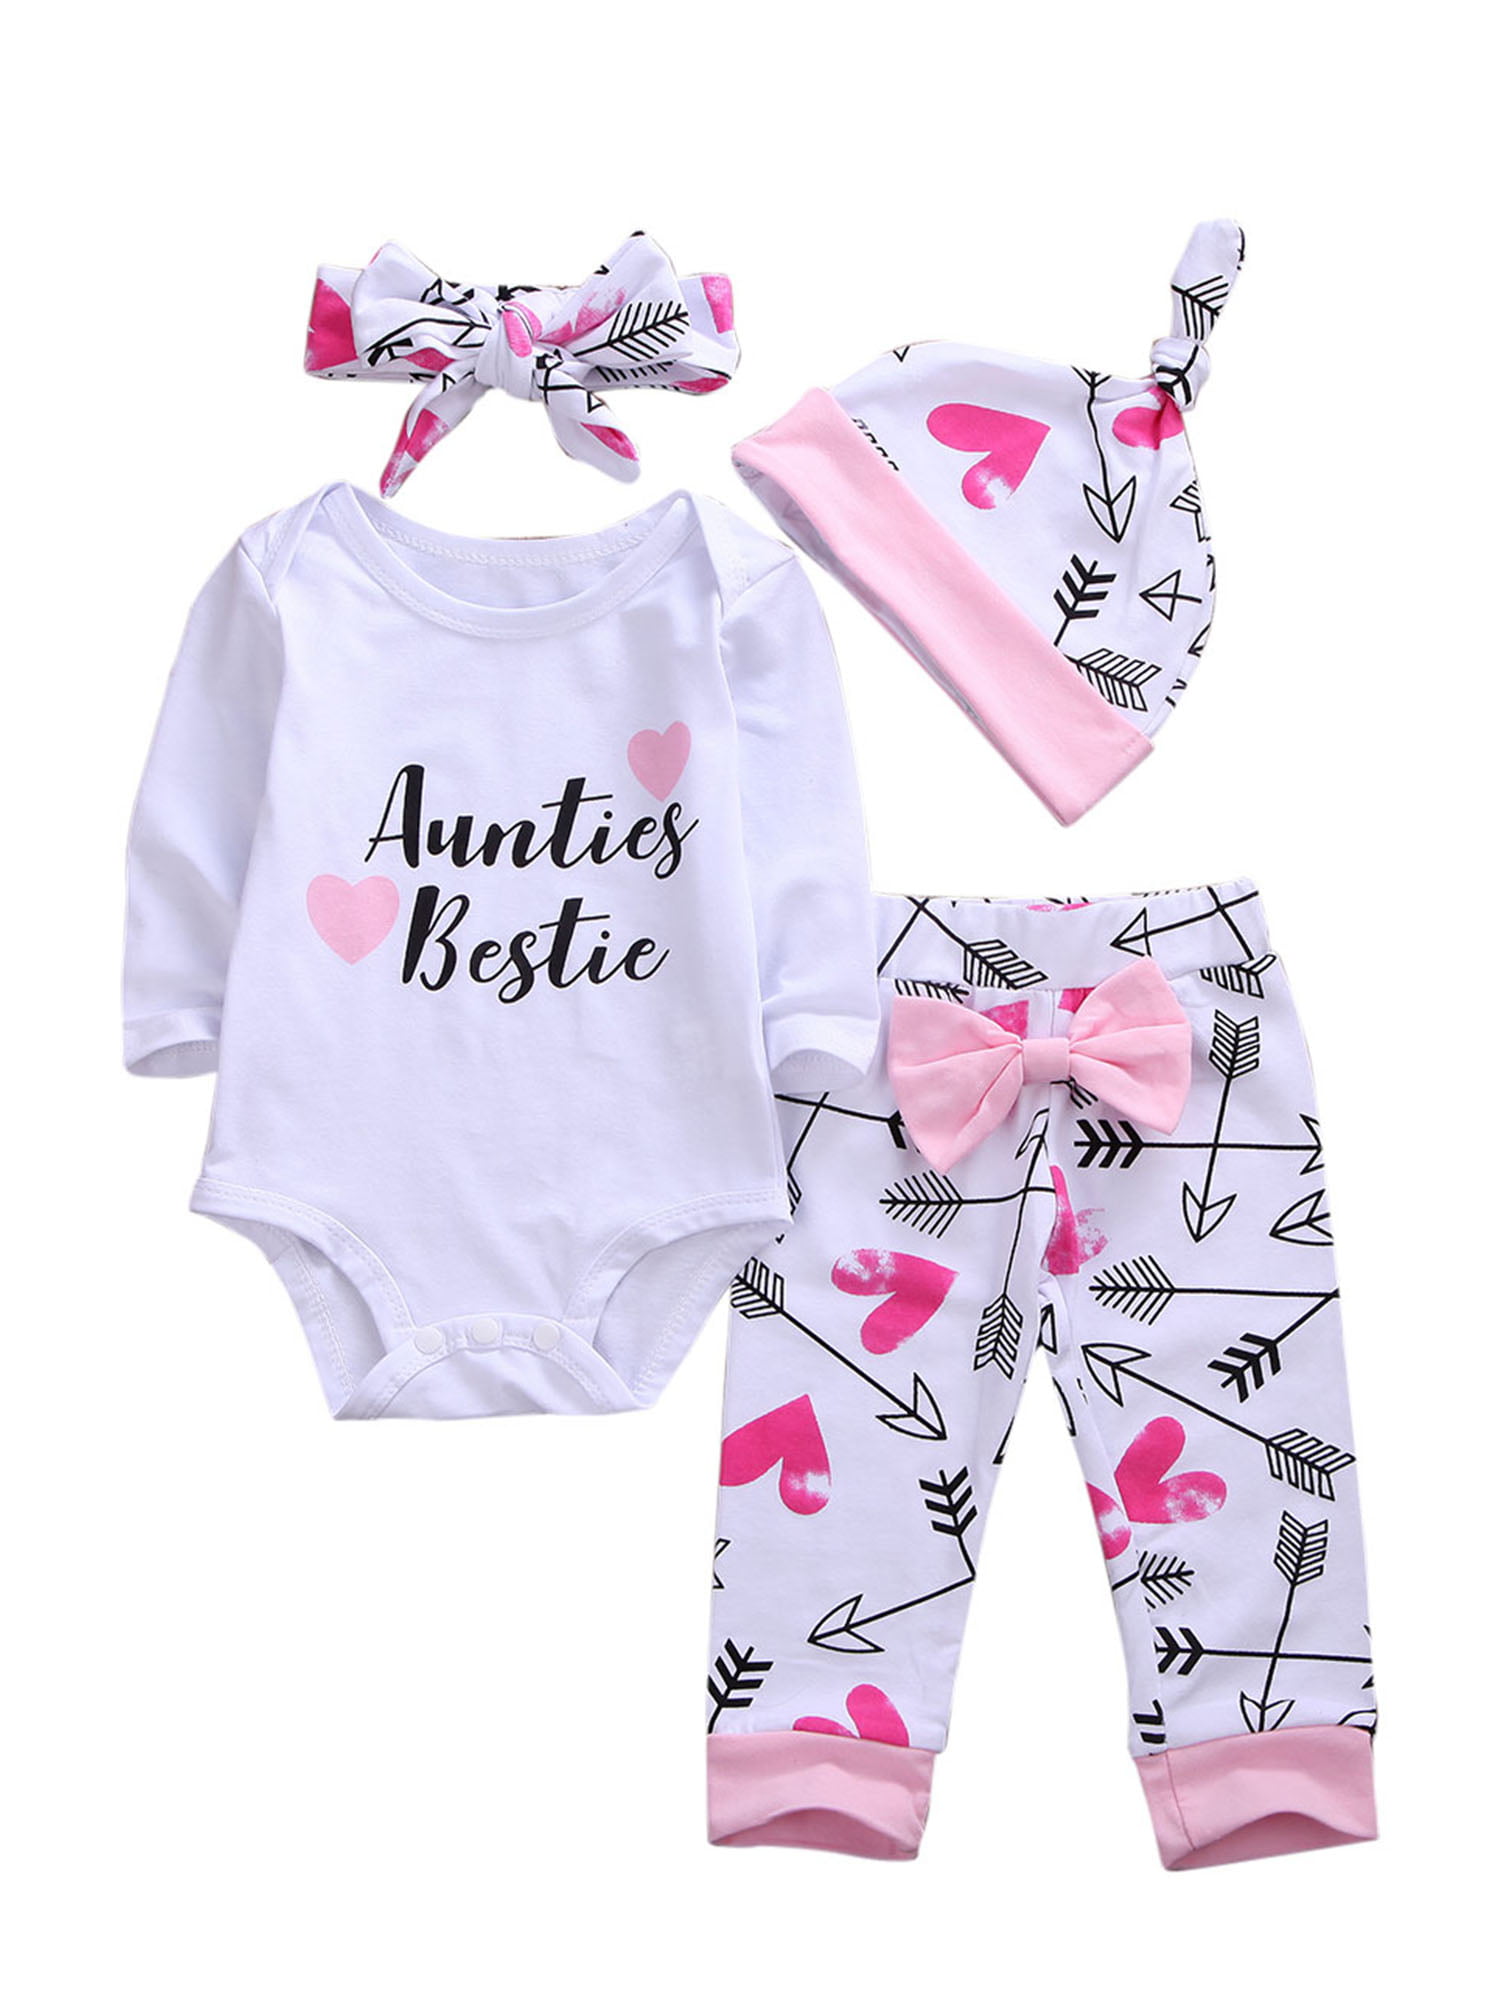 4PCS Newborn Baby Girl Romper Pants Hat Outfits Little Sister Casual Clothes Set 